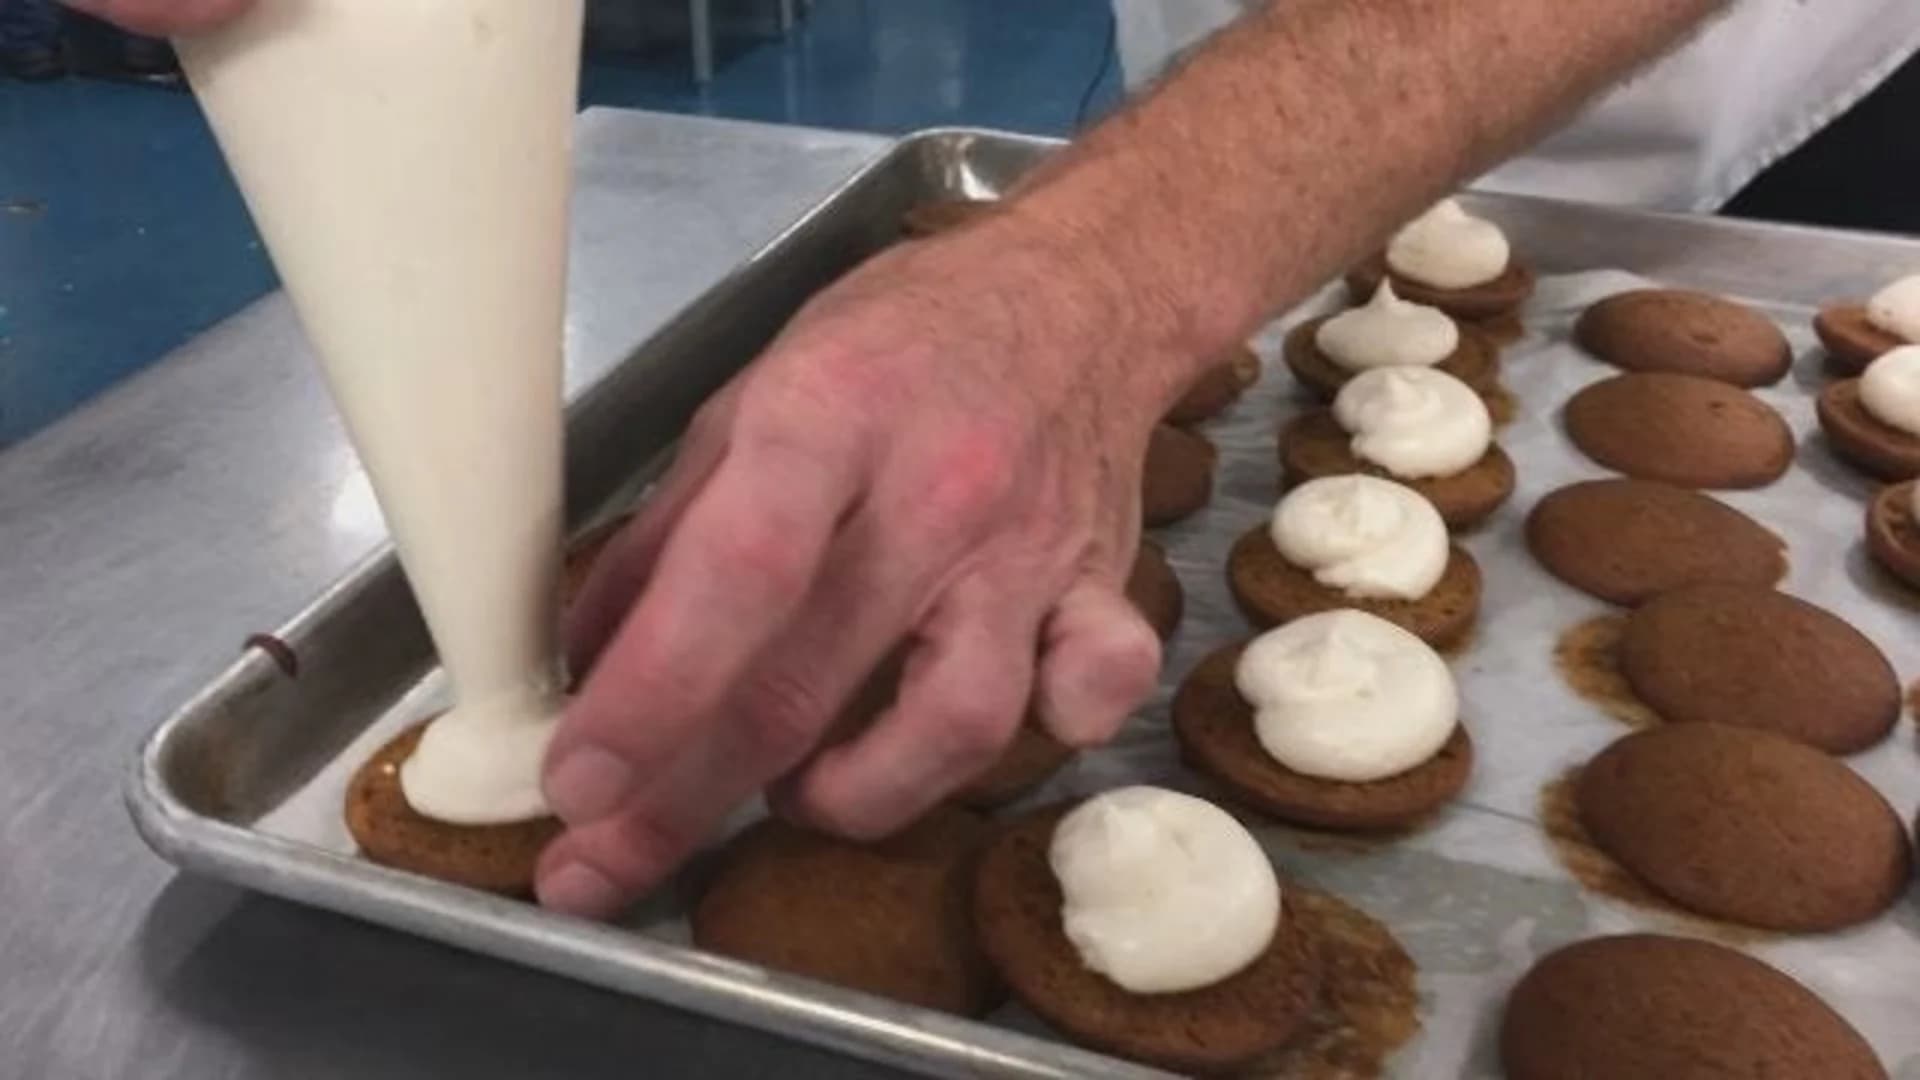 News 12 gets a behind-the-scenes tour of One Girl Cookies